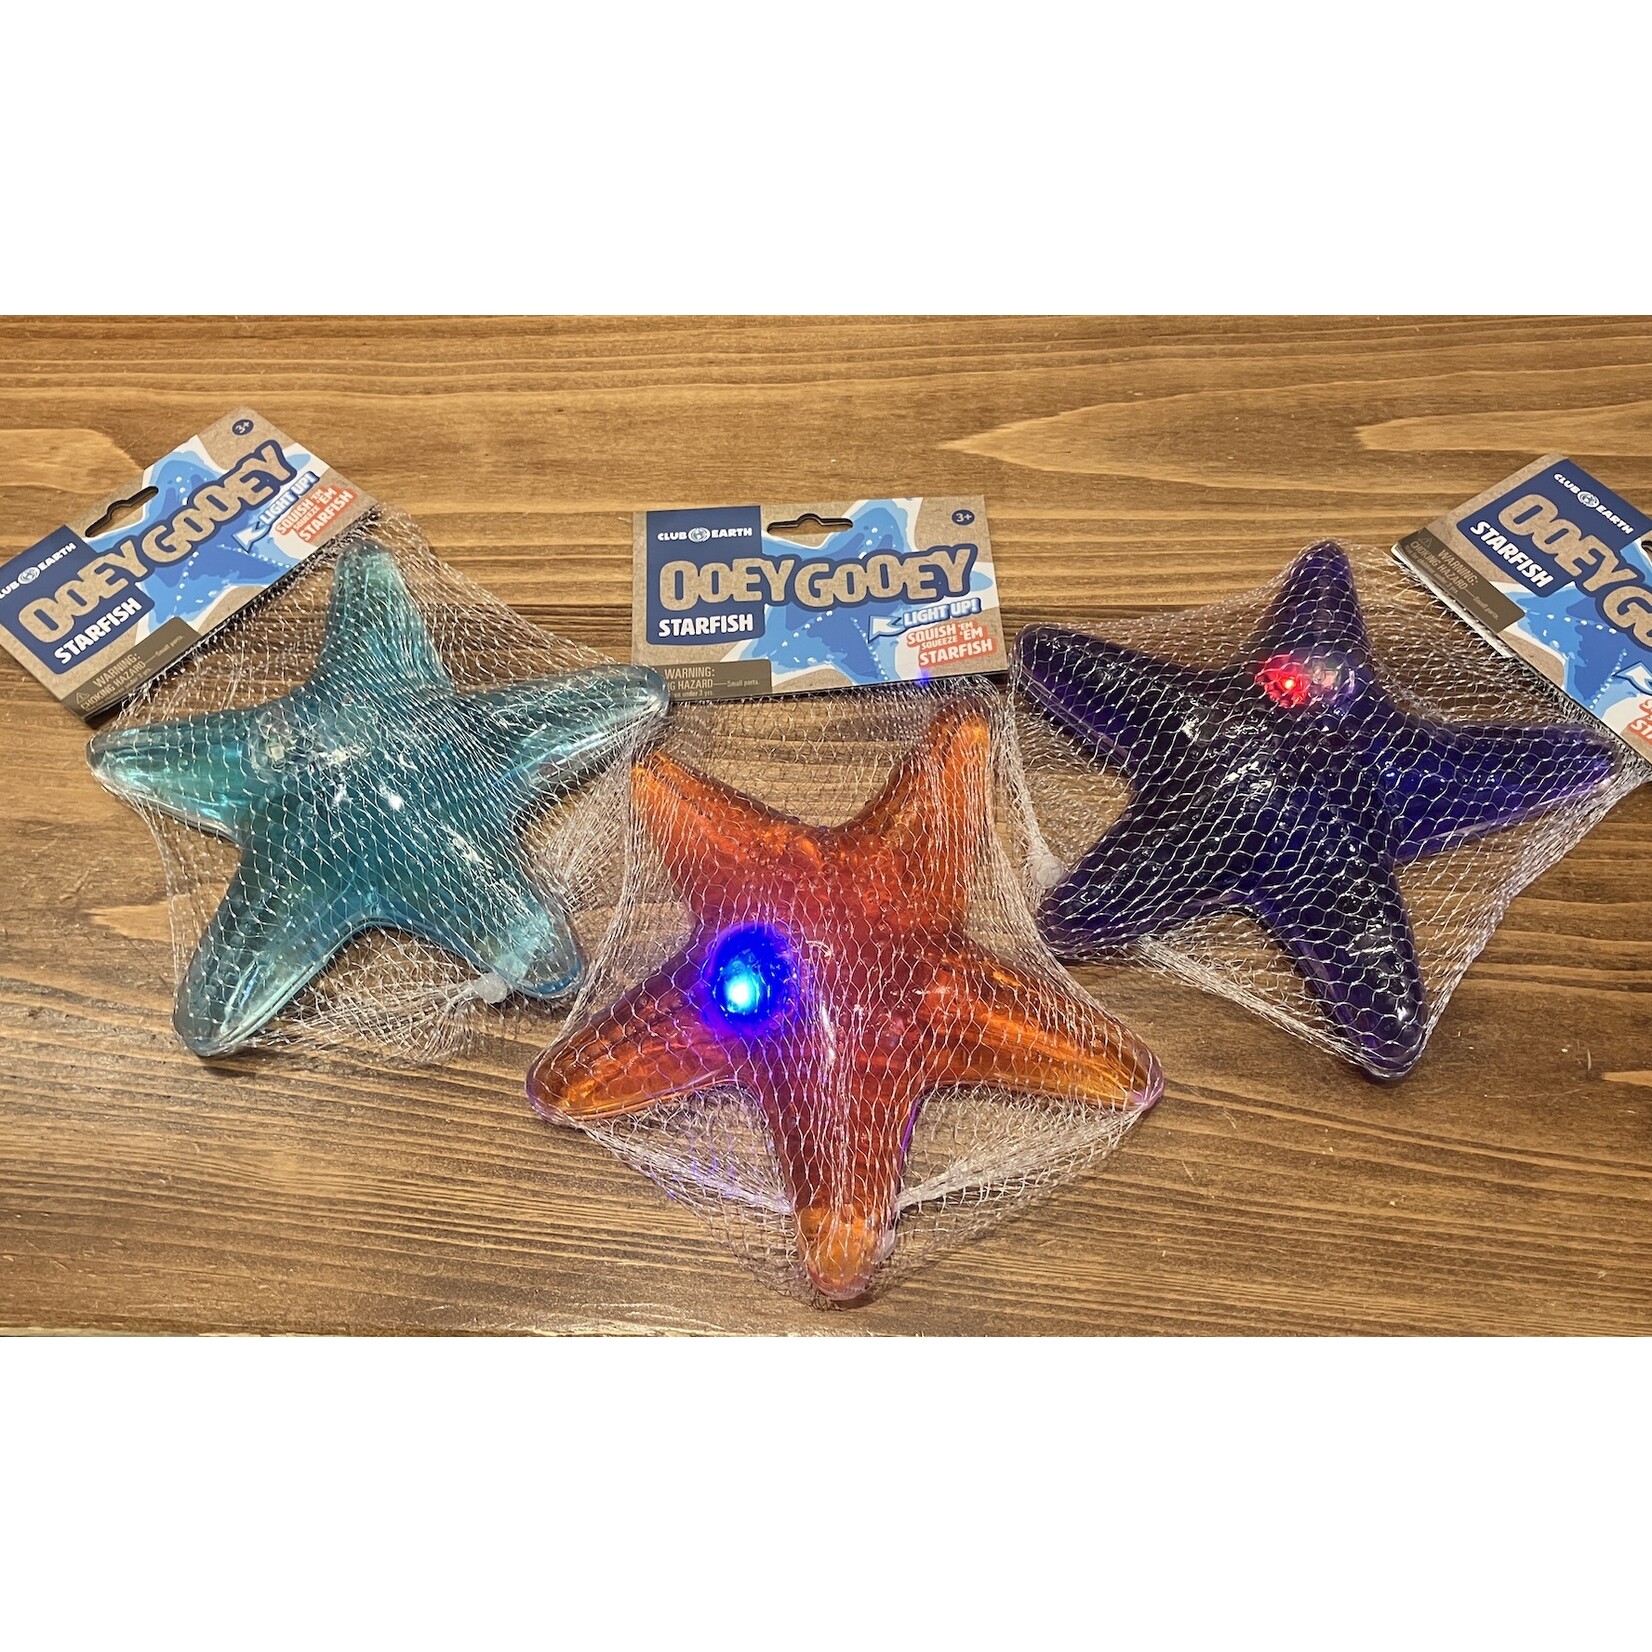 PLAY VISIONS Light Up Ooey Gooey Star Fish